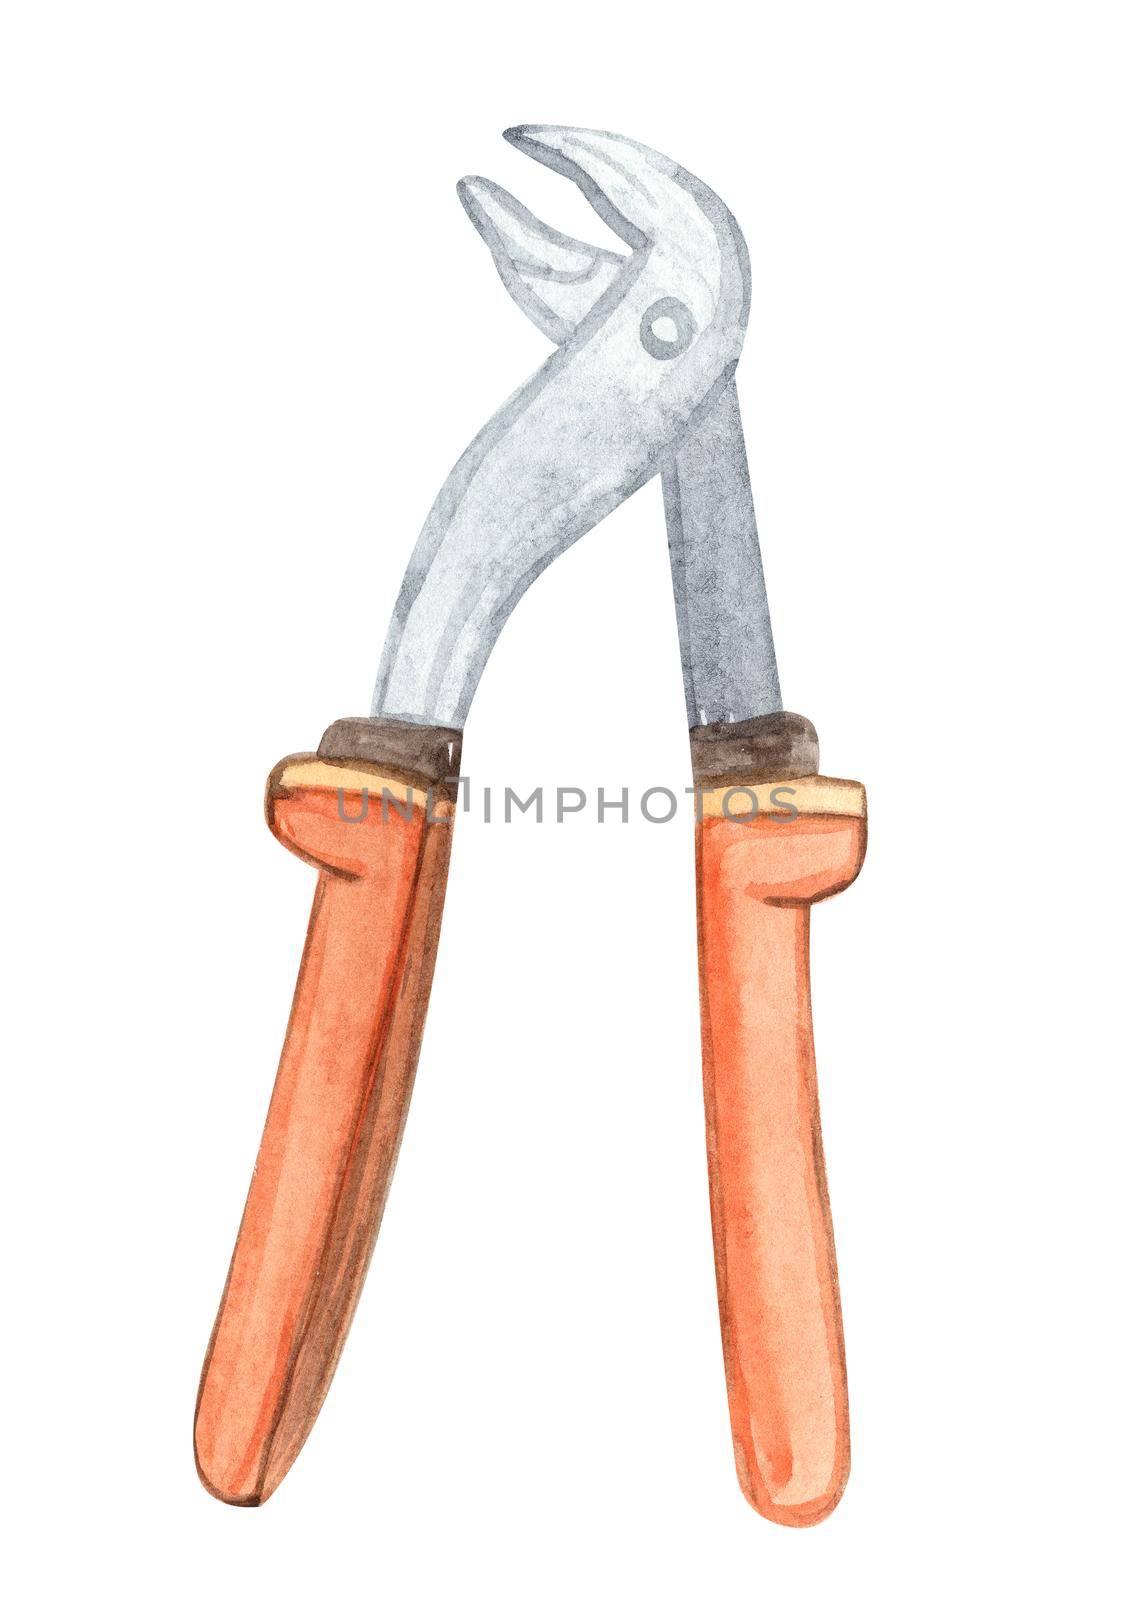 watercolor orange wrench tool isolated on white by dreamloud